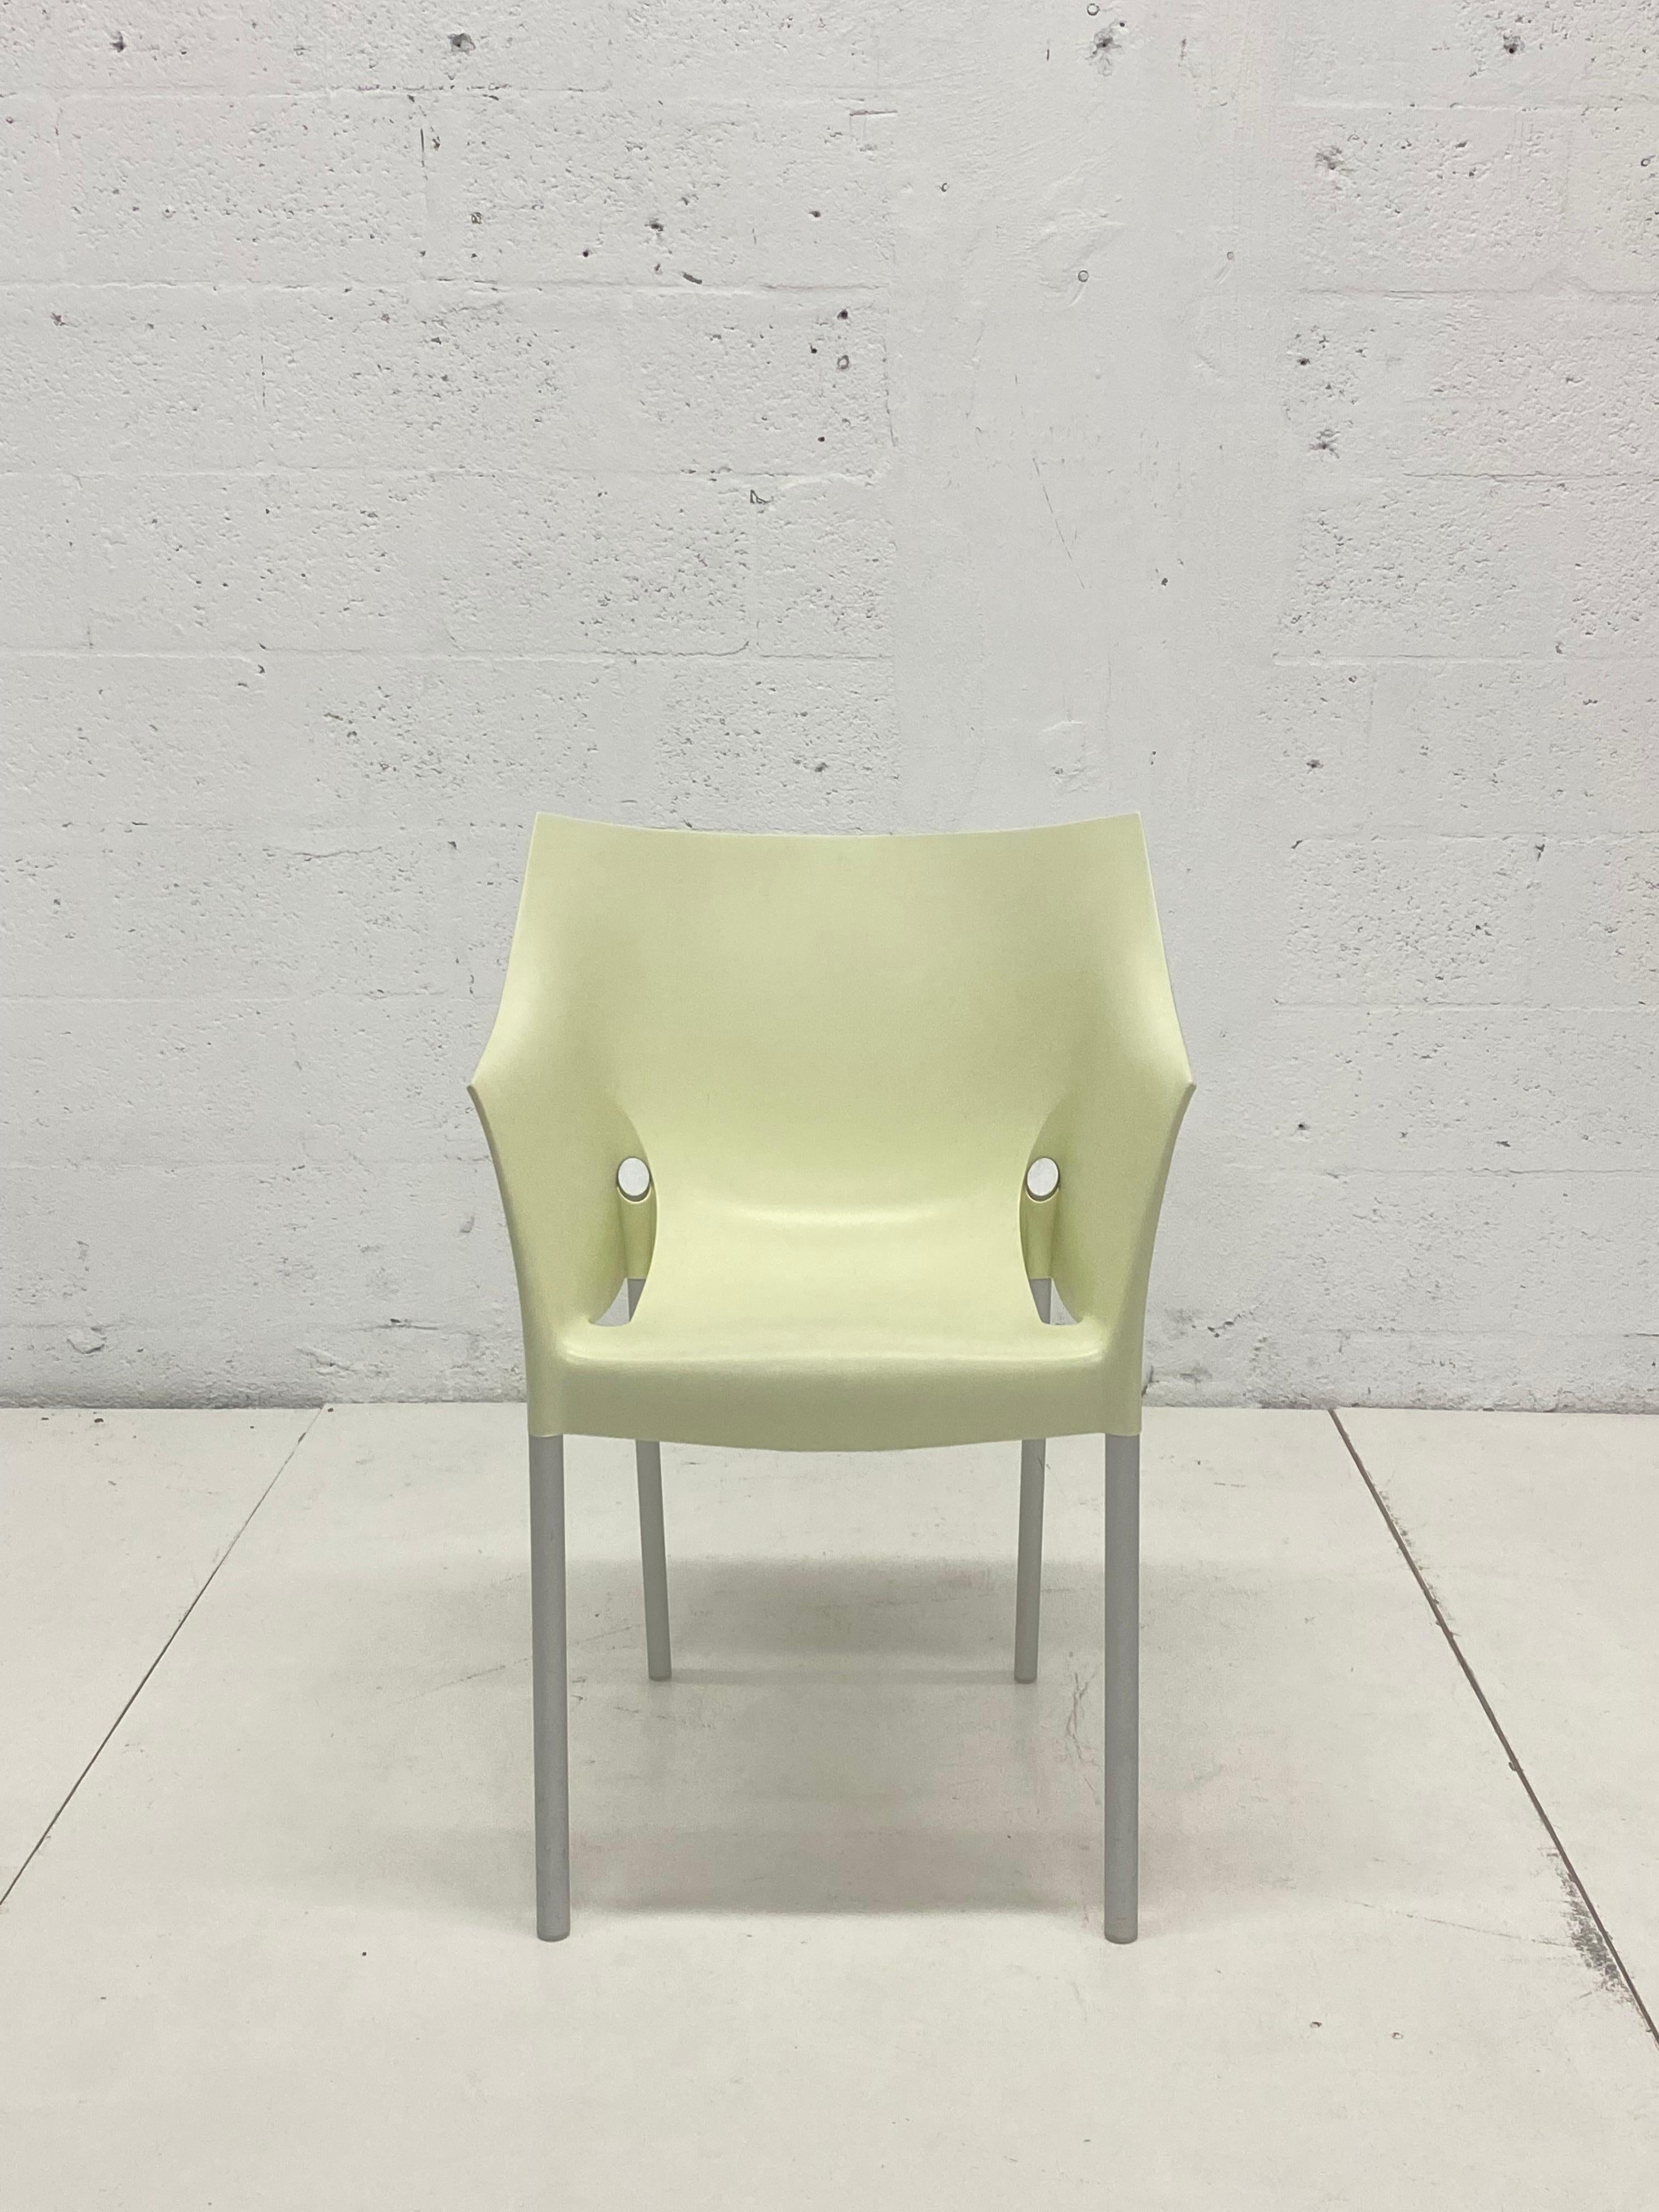 Cream Dr. No chair with aluminum legs by Philippe Starck and produced by Kartell, Italy.